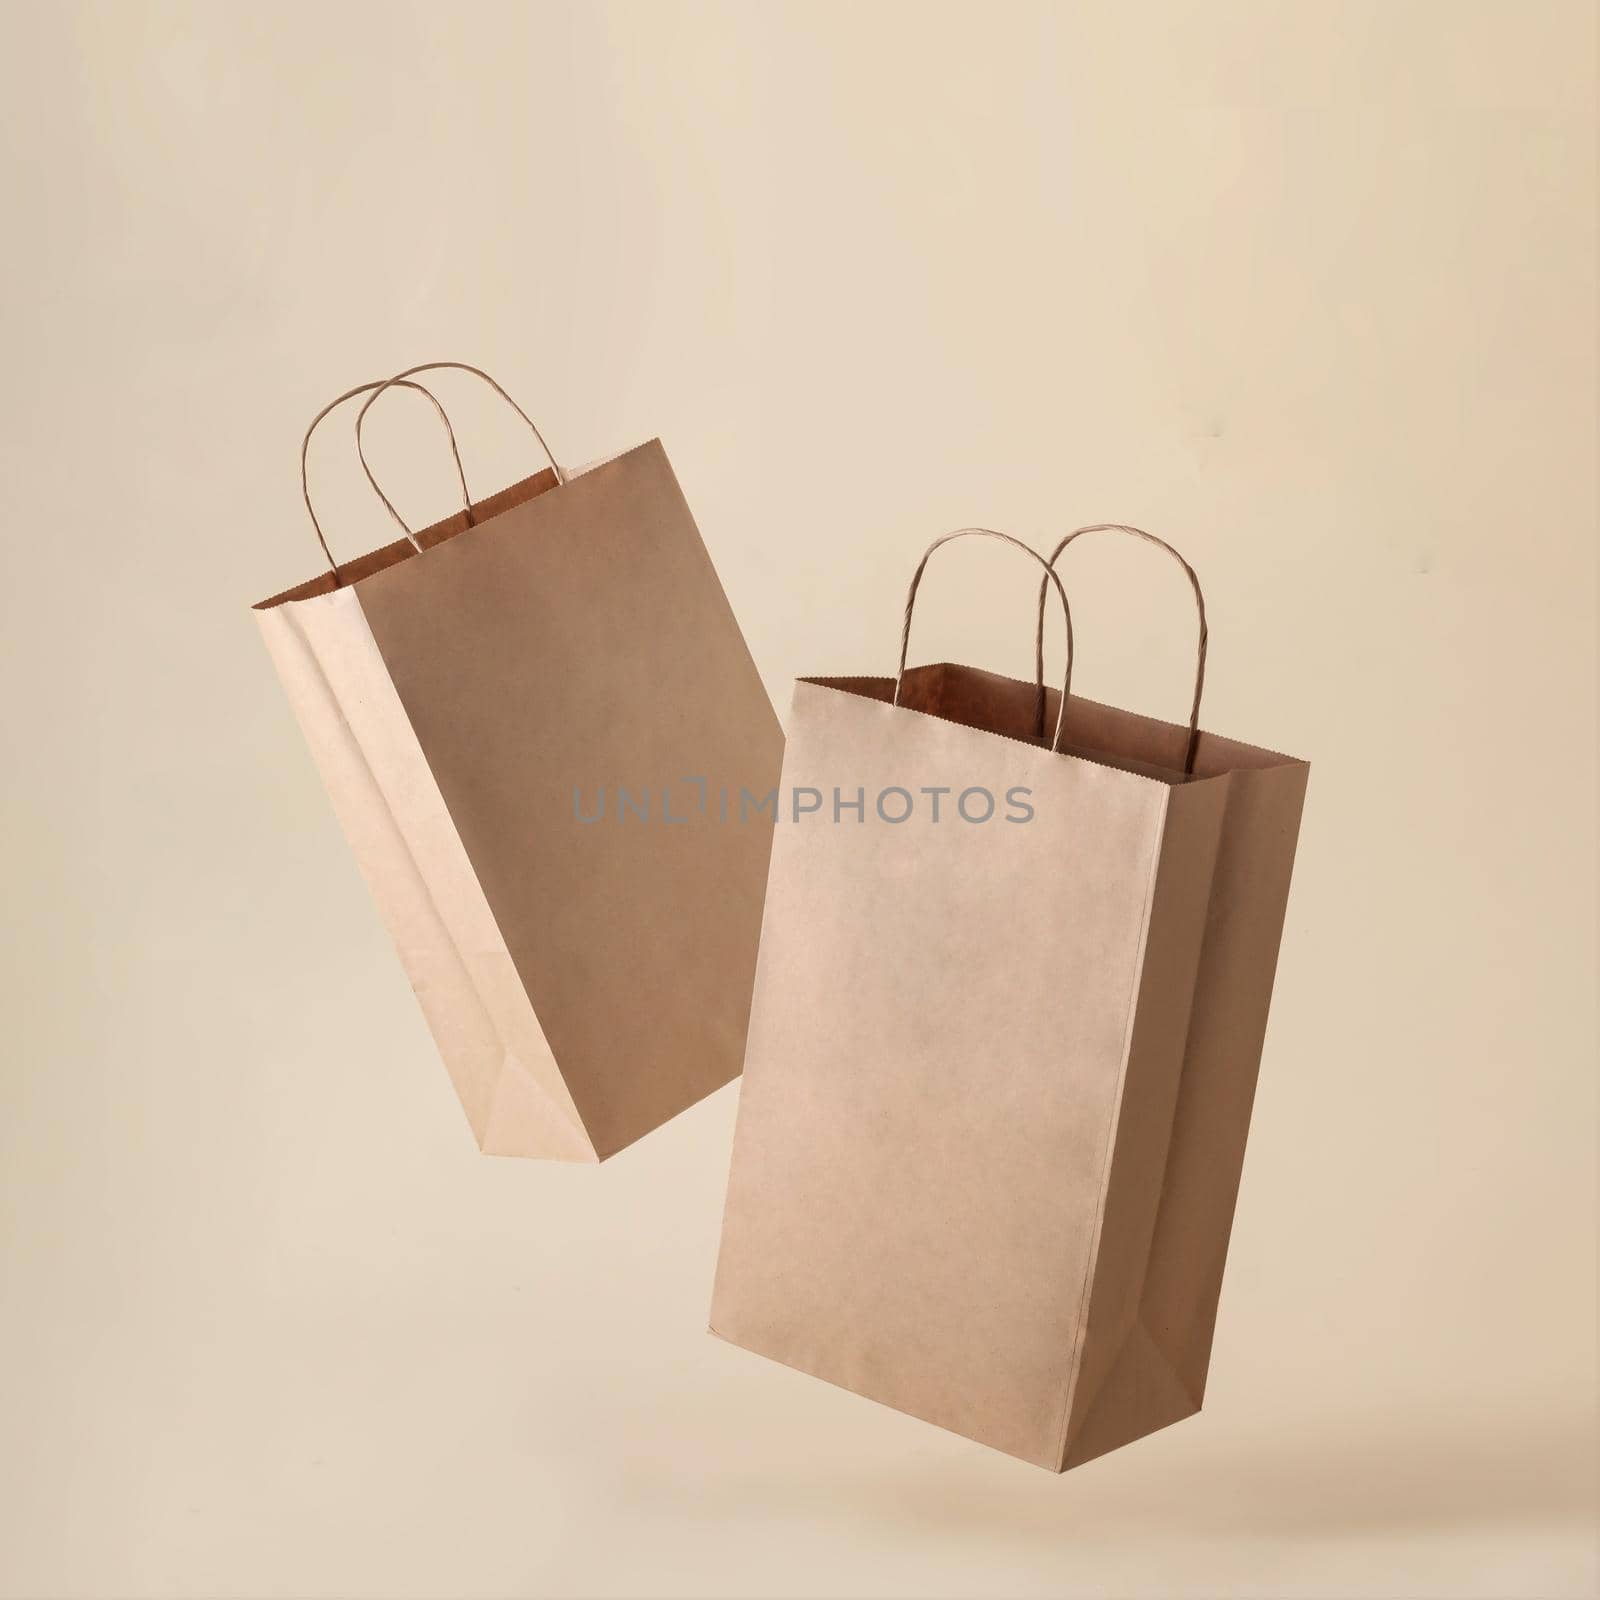 Two paper bags in a container levitation on a clean beige background by sergii_gnatiuk